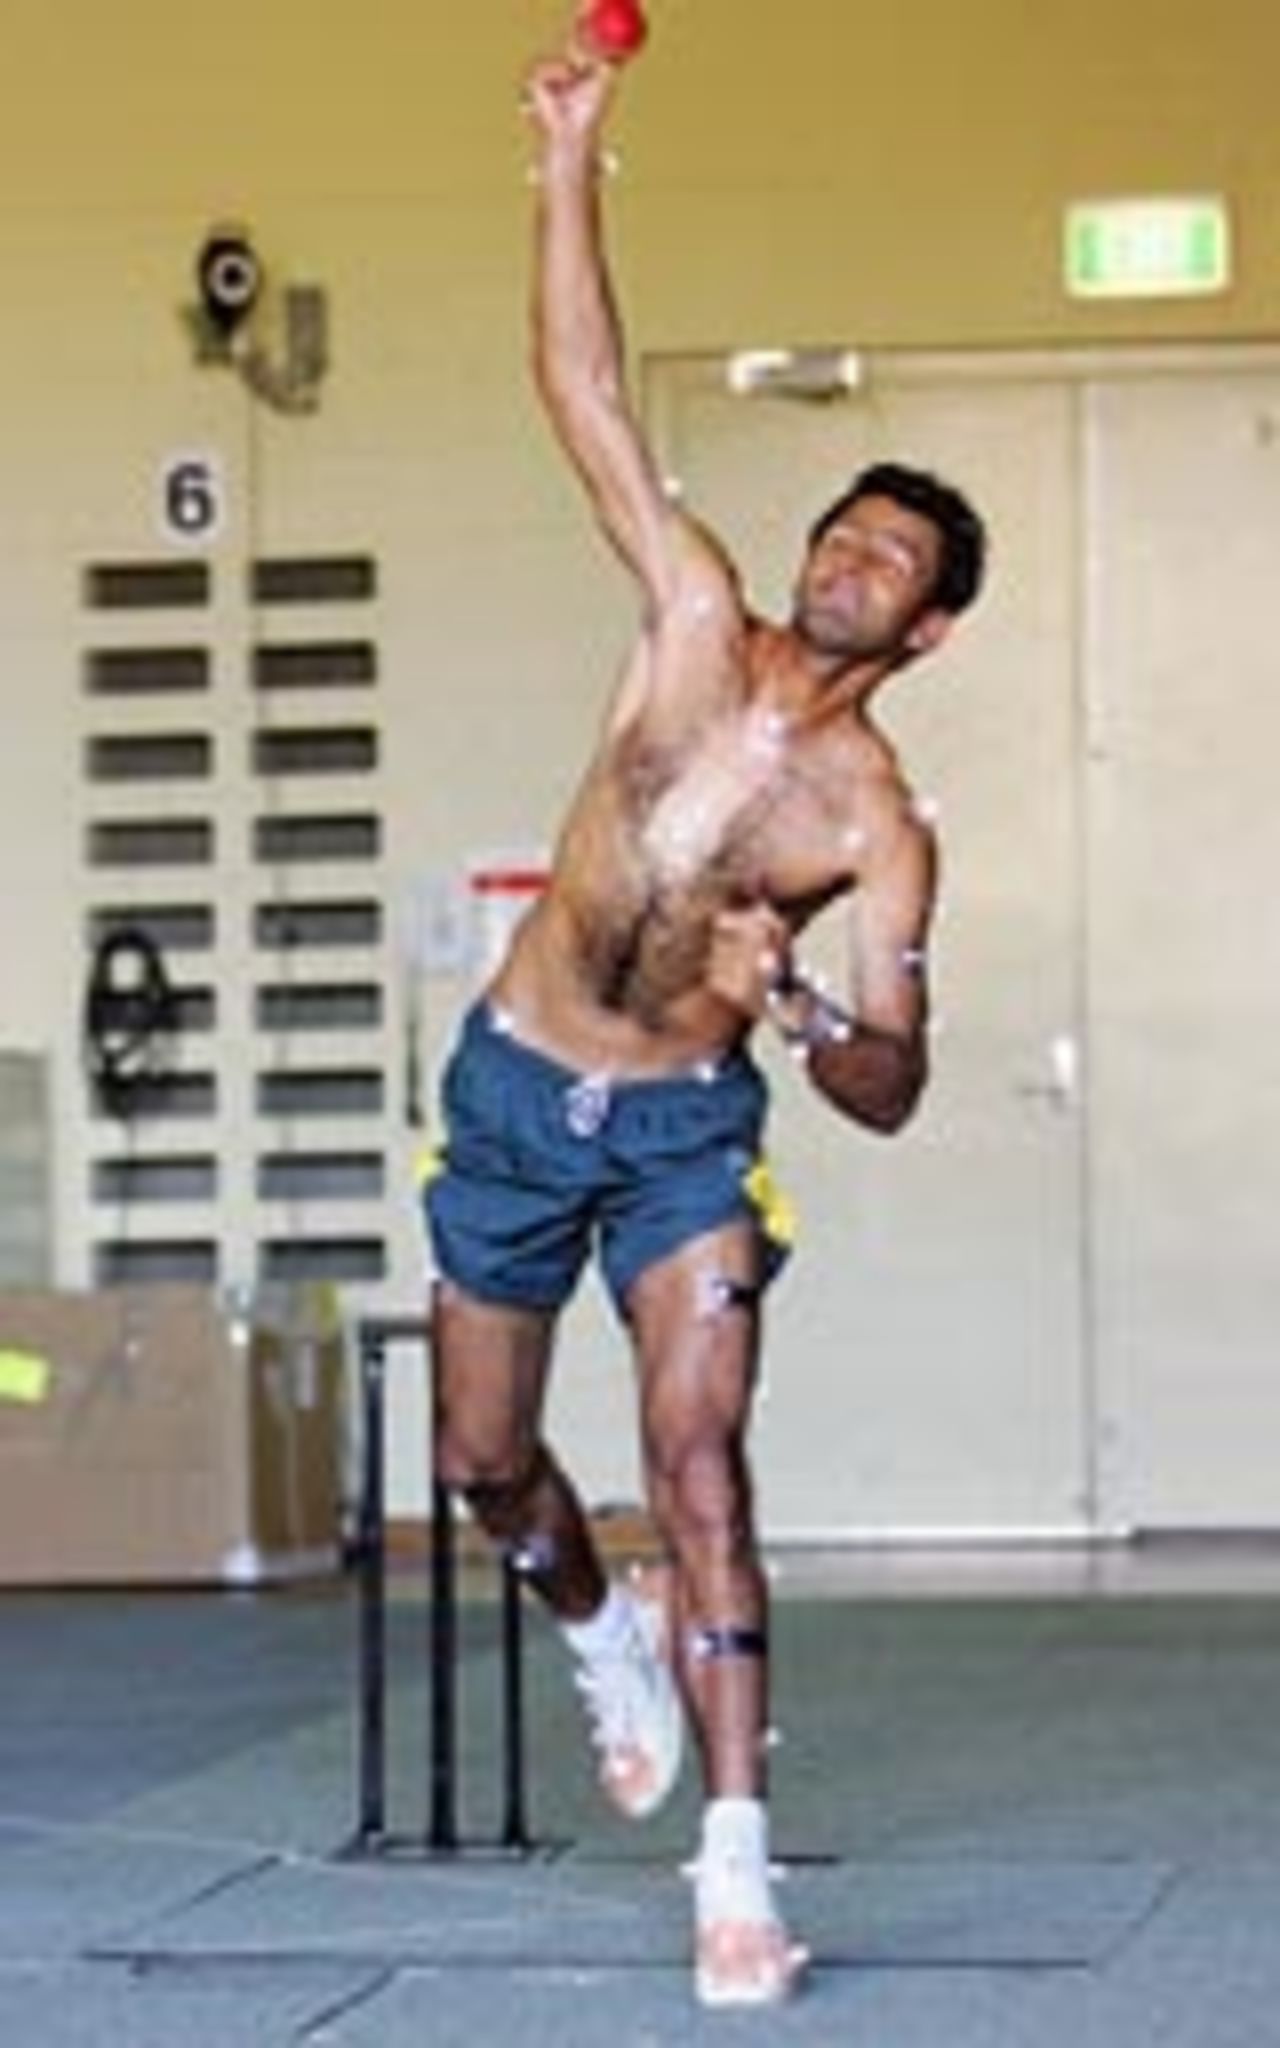 Shoaib Malik during a test on his suspect bowling action at the University of Western Australia, December 13, 2004 i